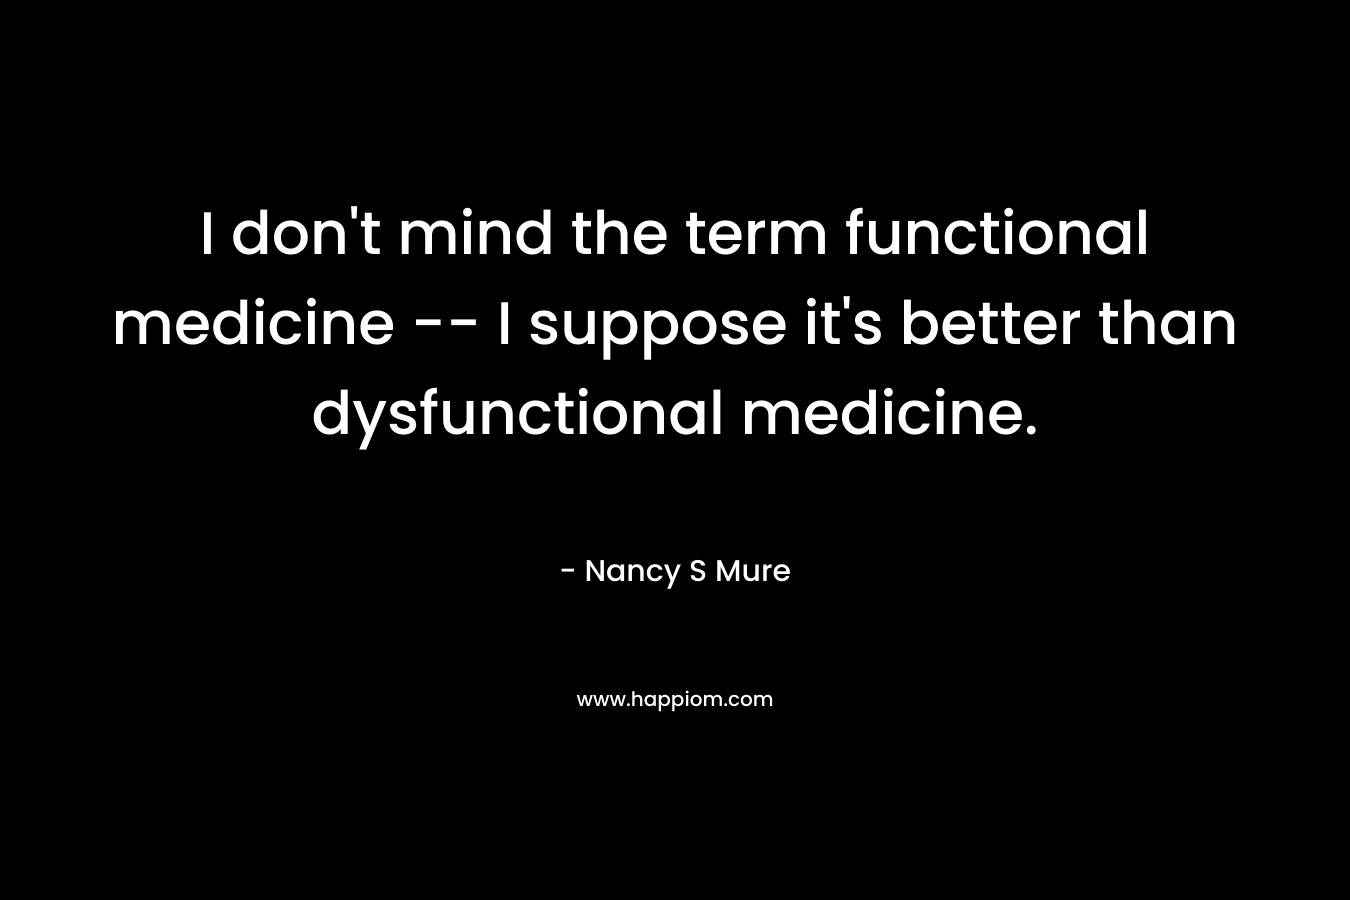 I don't mind the term functional medicine -- I suppose it's better than dysfunctional medicine.